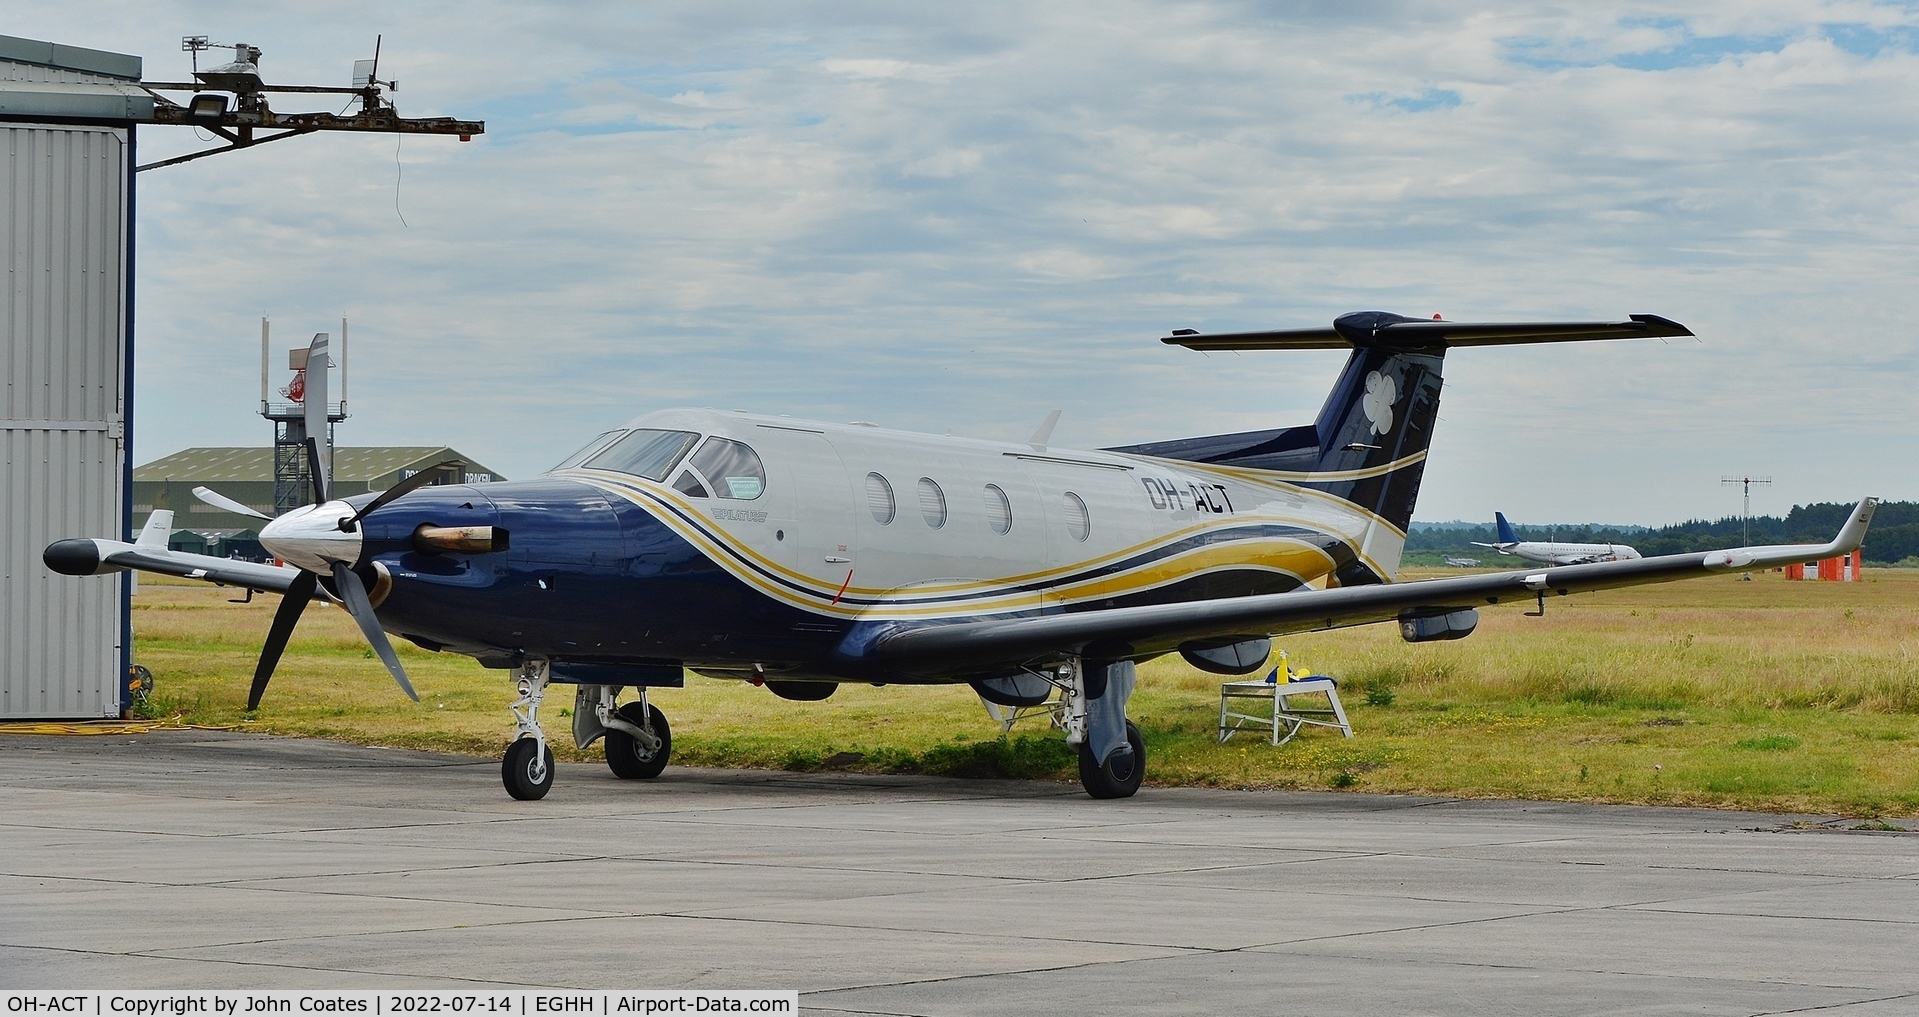 OH-ACT, 2001 Pilatus PC-12/45 C/N 406, Parked at Bournemouth Aviation Services